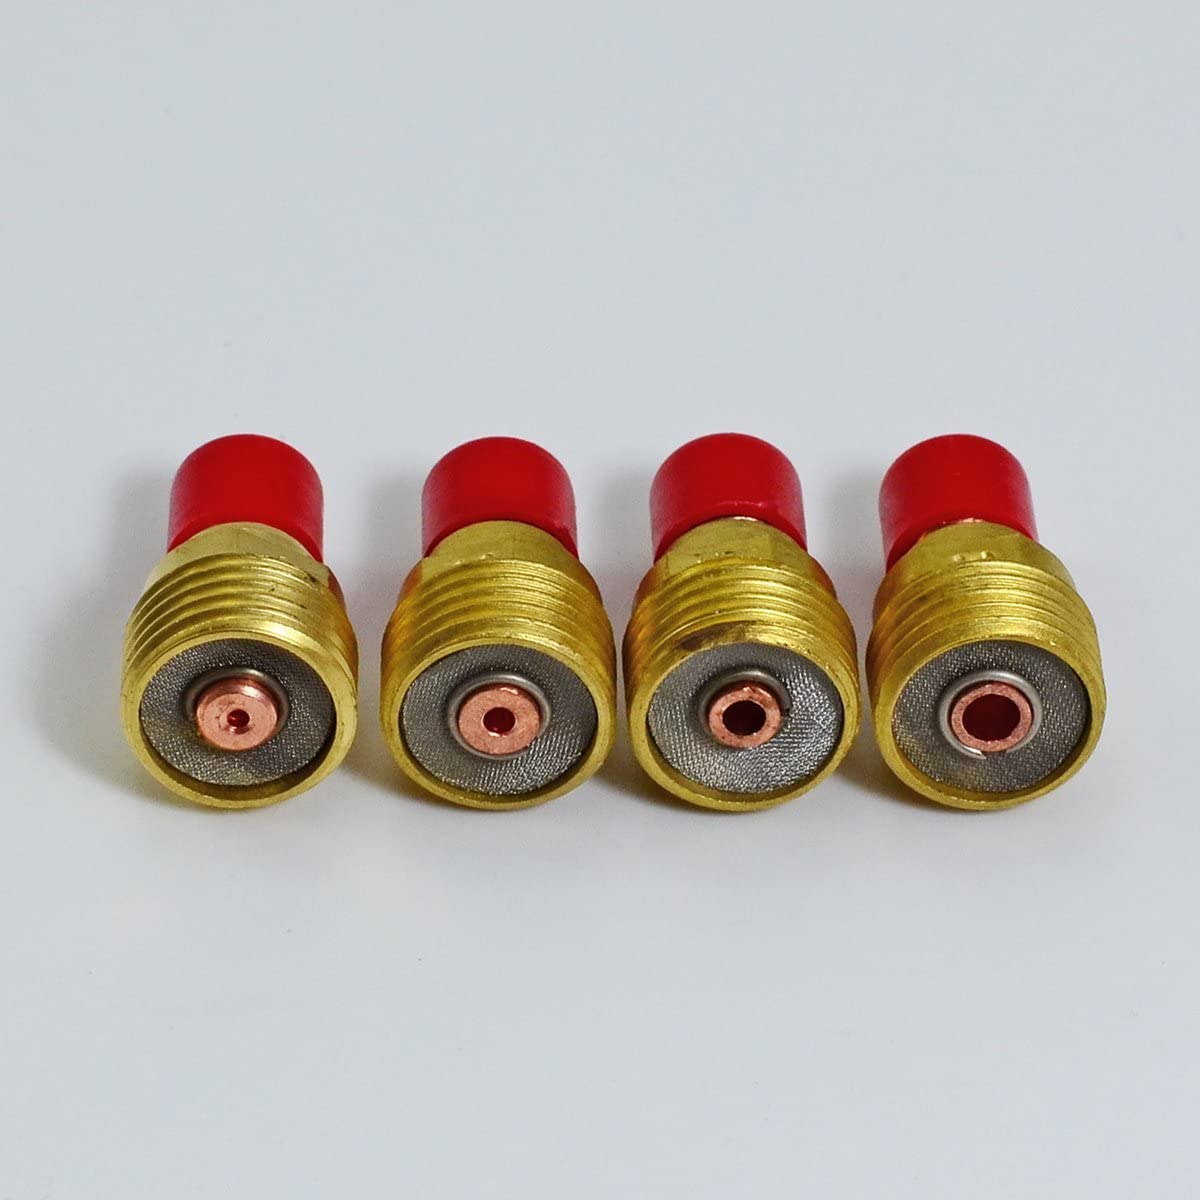 4246Pcs-TIG-Gas-Lens-Collet-Body-Assorted-Size-Kit-Fit-SR-WP-9-20-25-TIG-Welding-Torch-Accessories-1927685-6